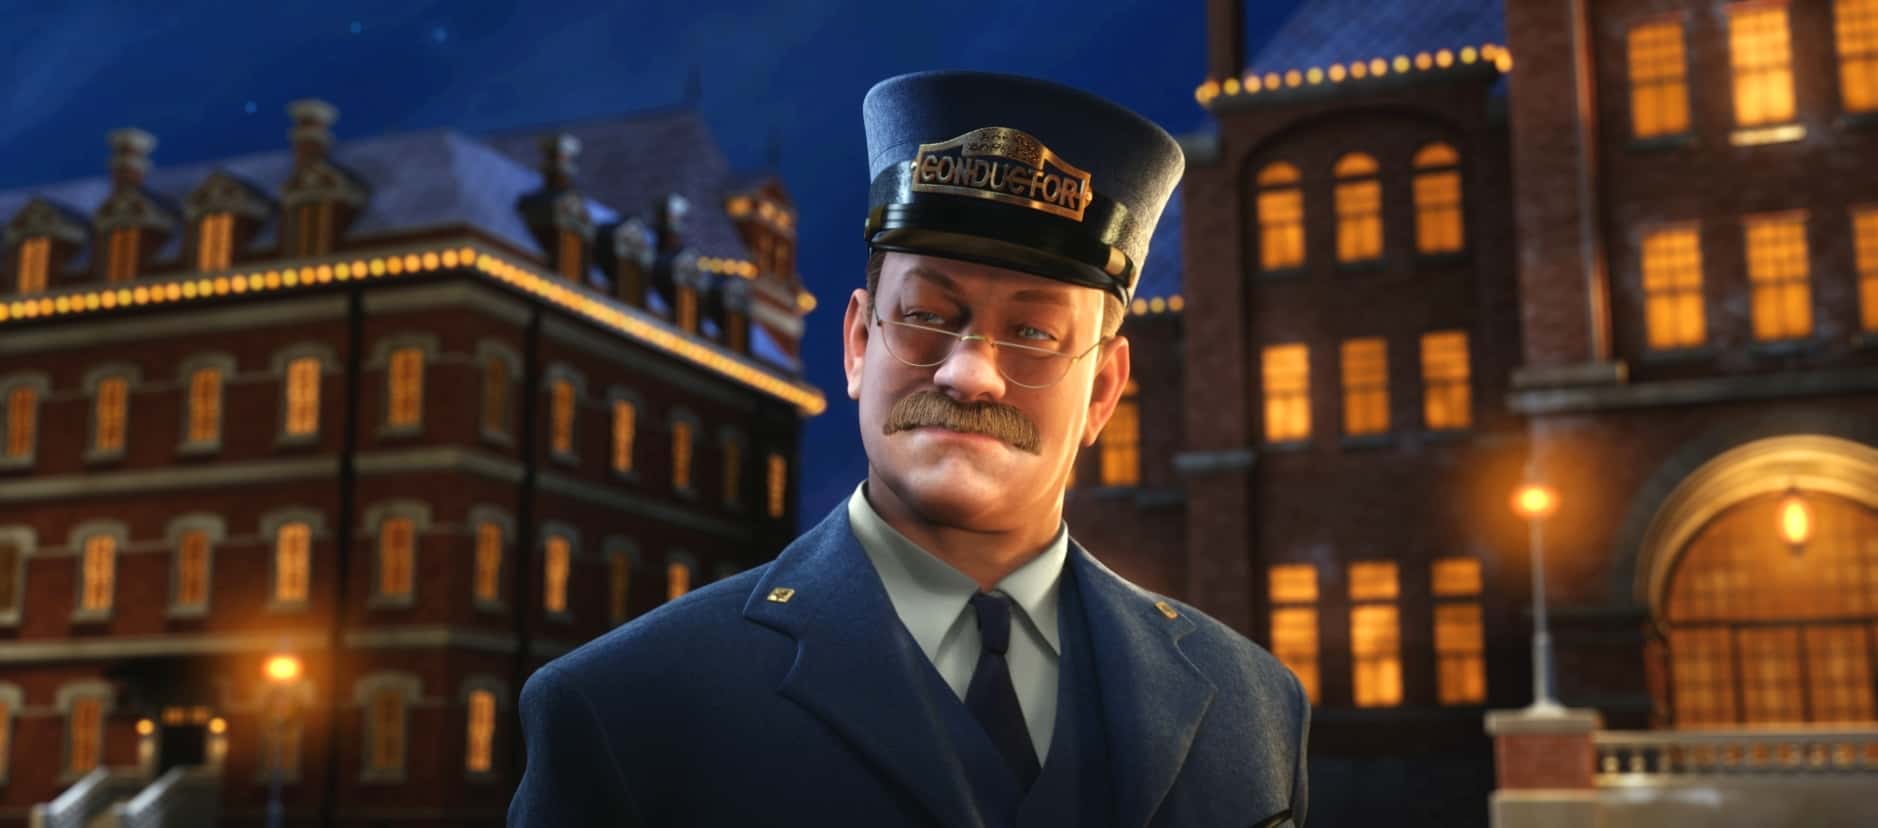 An animated man in a conductor’s uniform in this image from Castle Rock Entertainment.